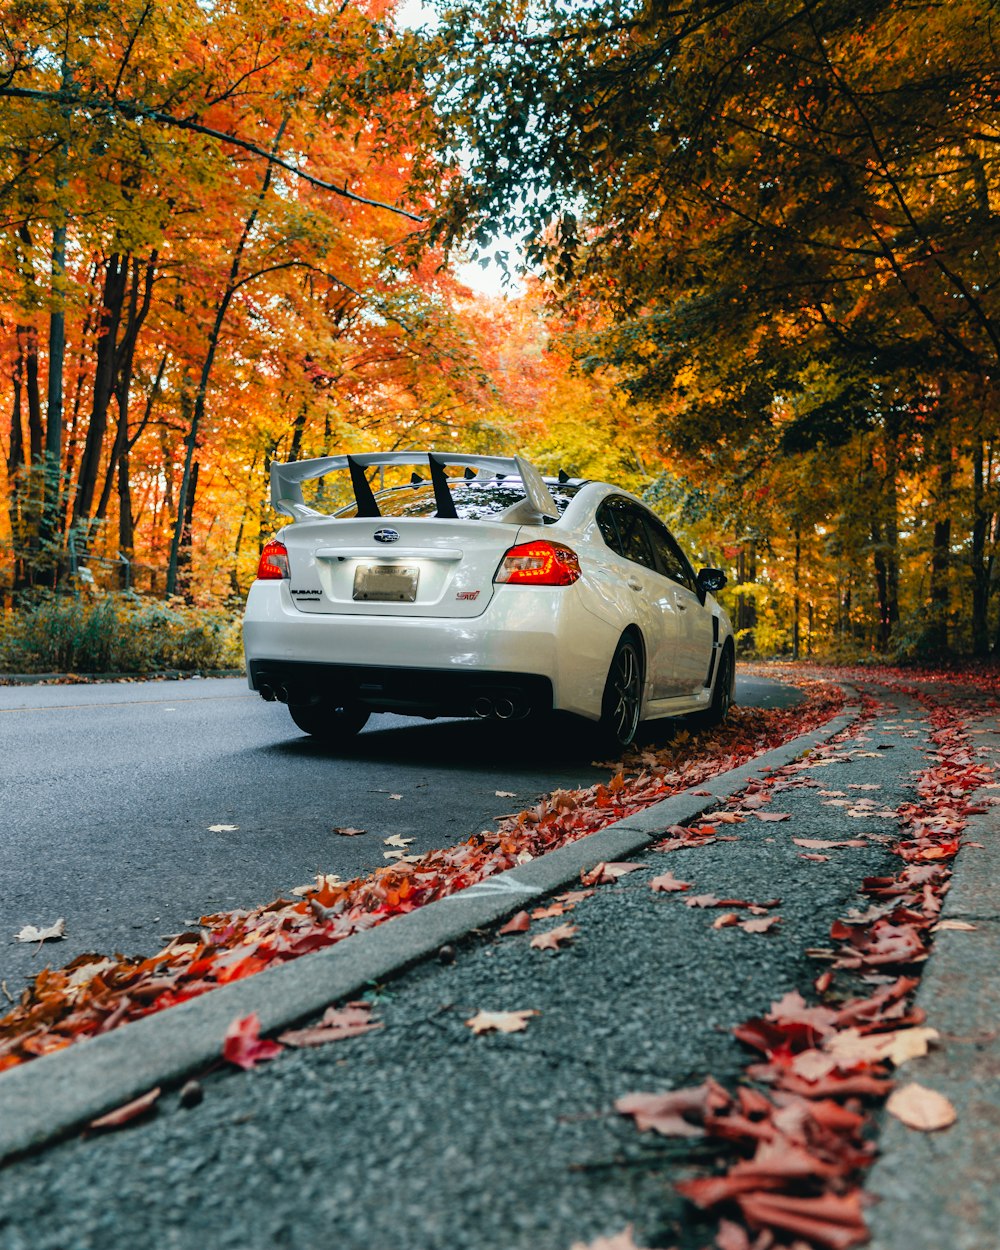 white car on road with brown leaves on ground